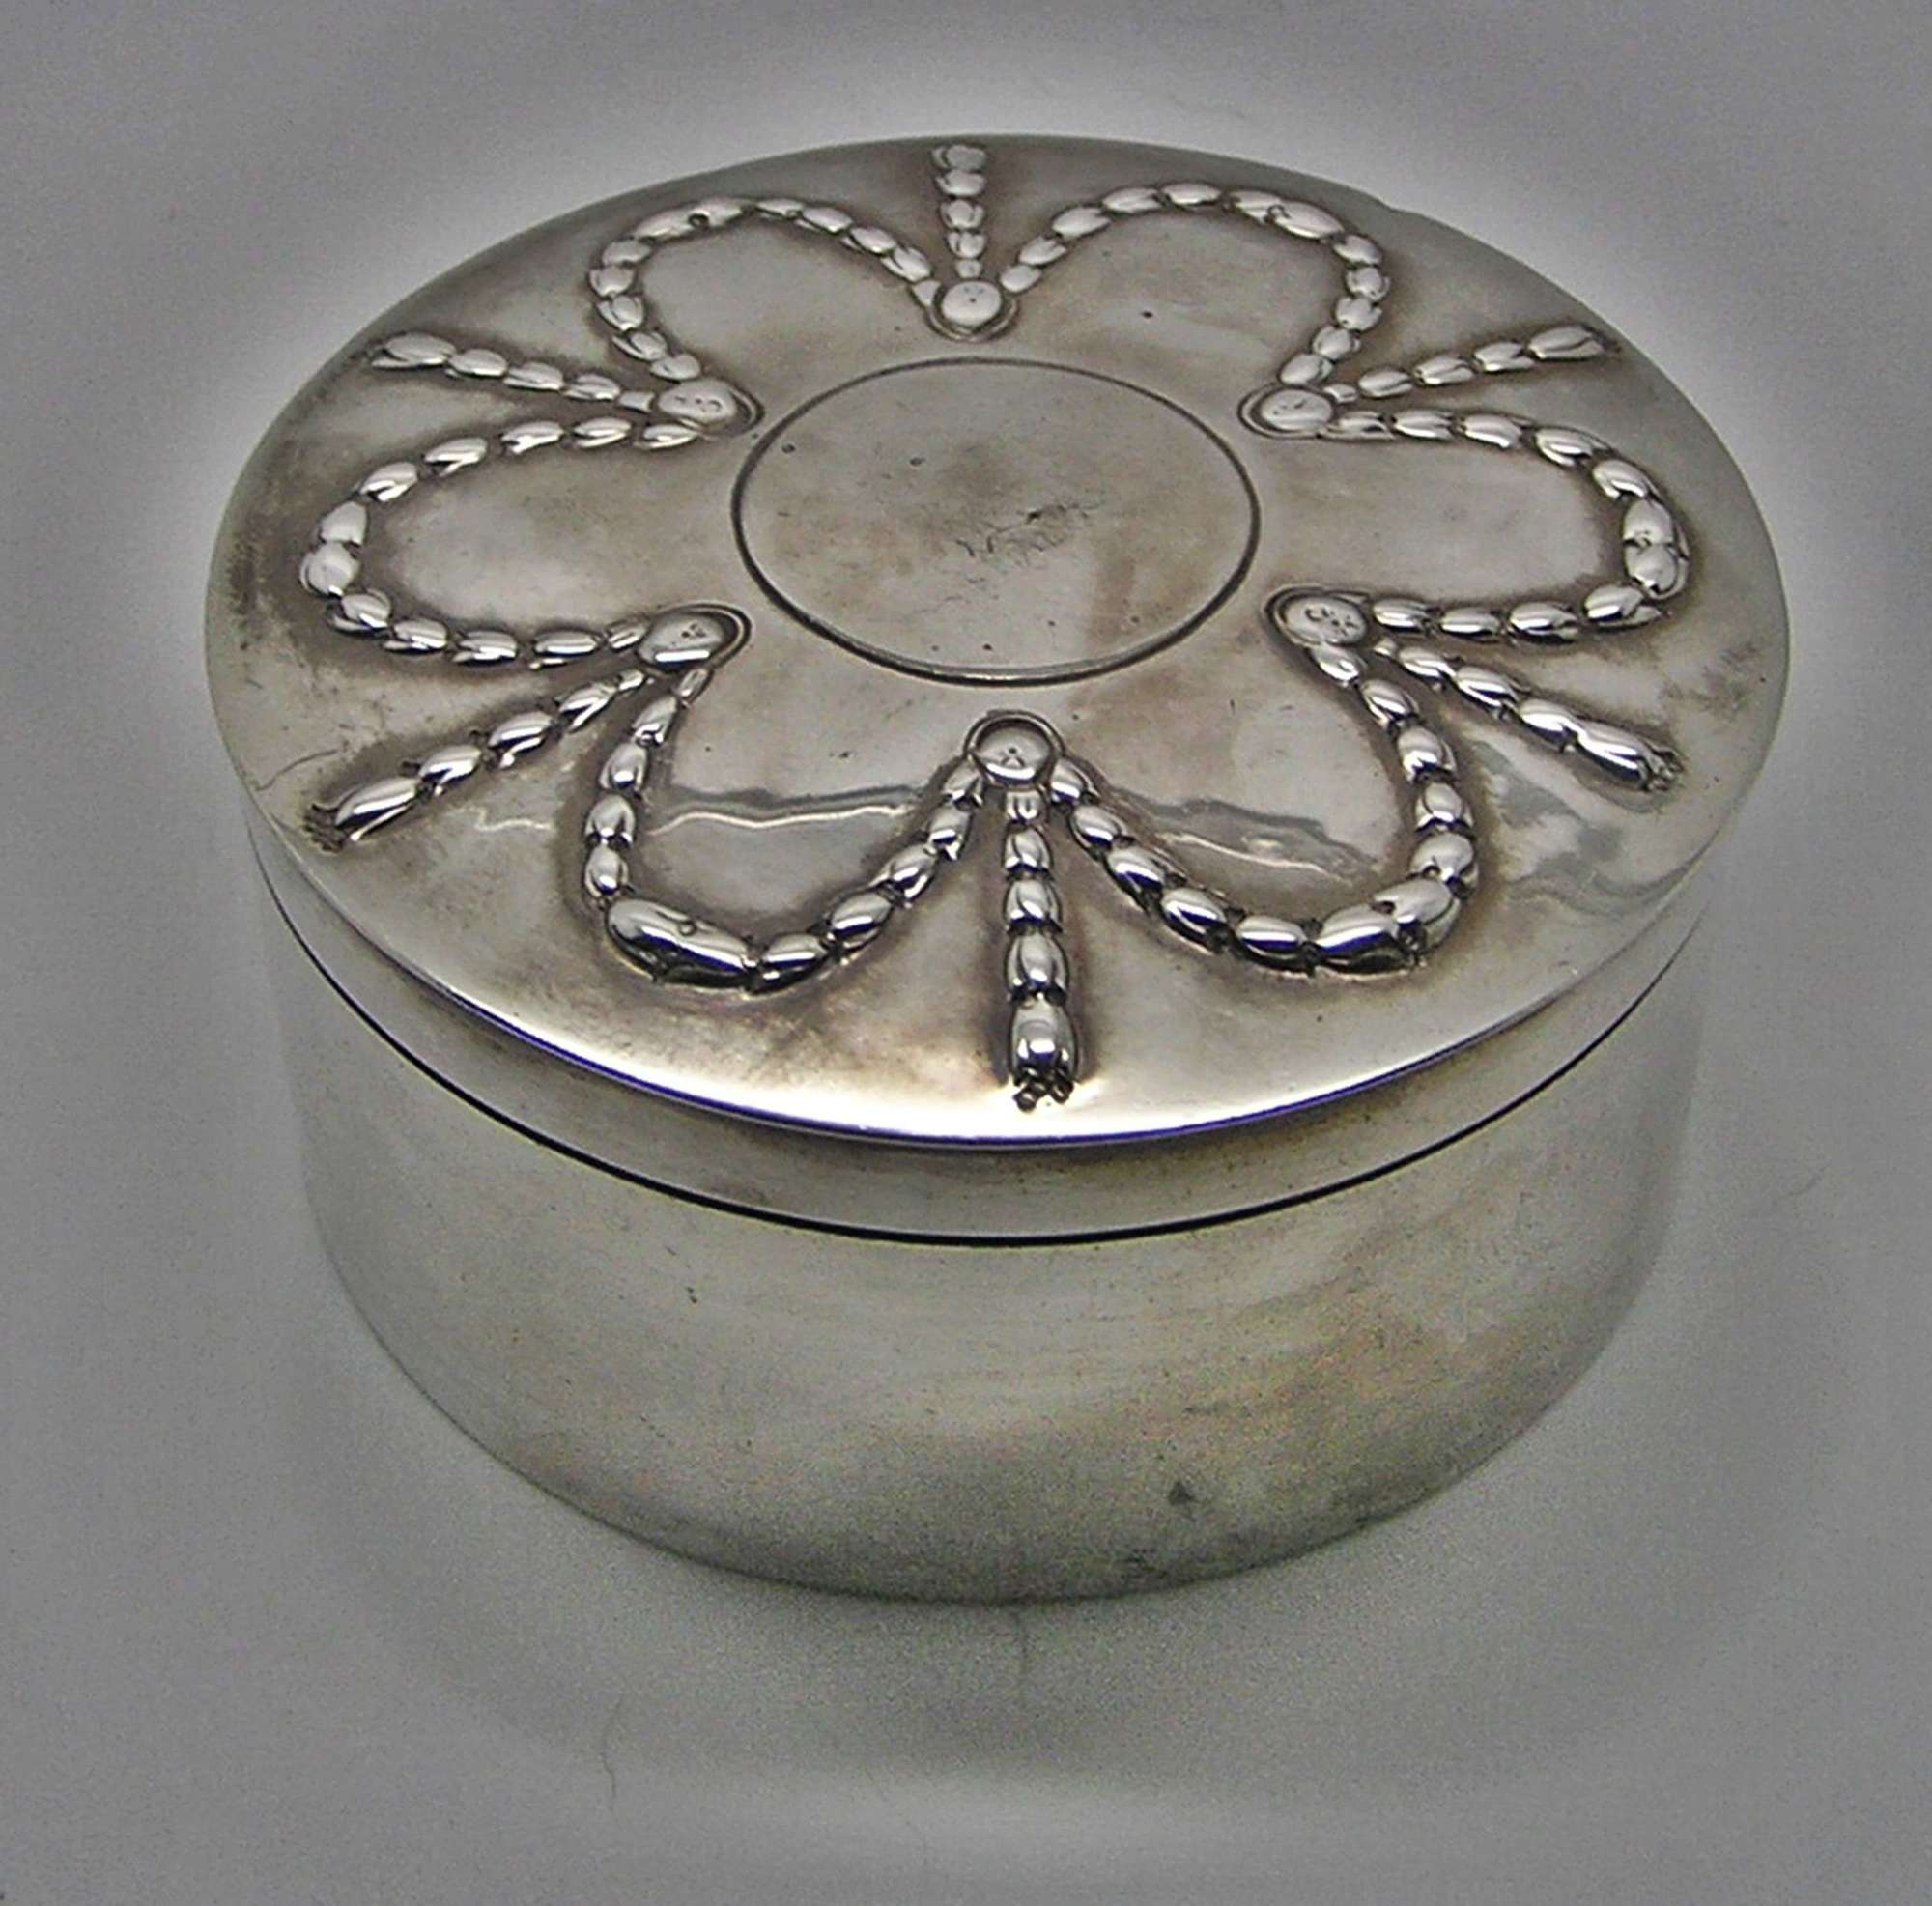 Georgian silver spice box by Andrew Fogelberg from Spetchley Park